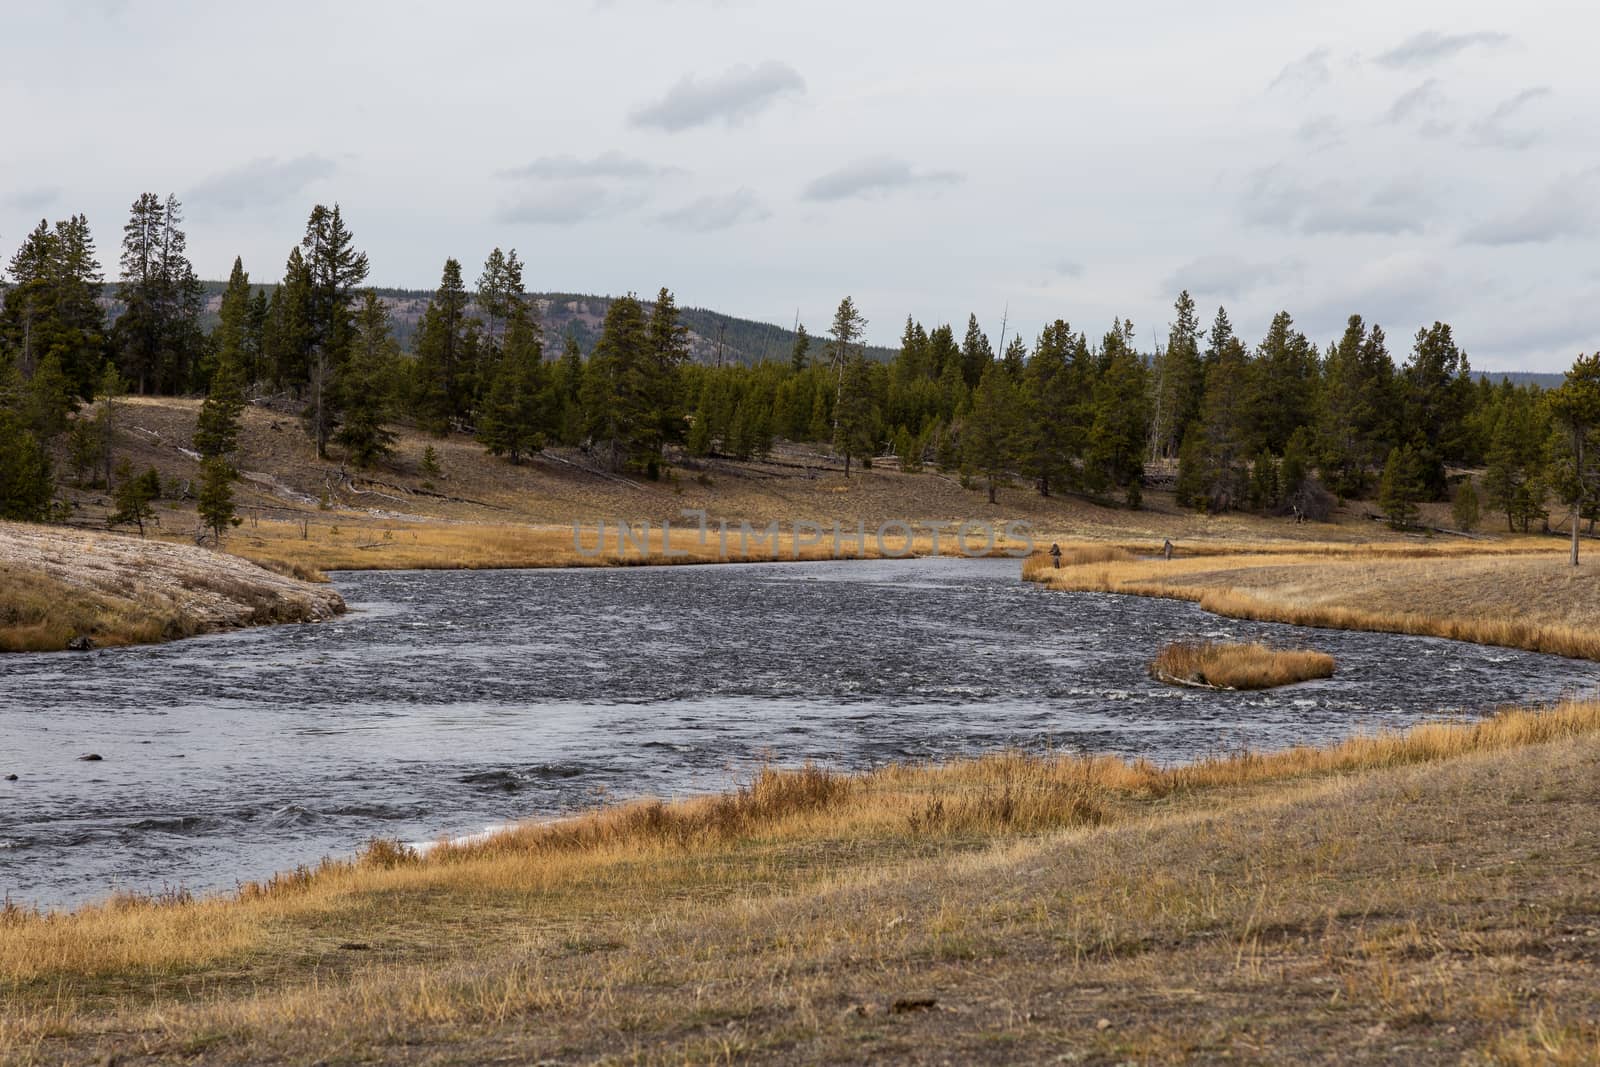 Fishermen fly fishing on Firehole River in Yellowstone National Park.